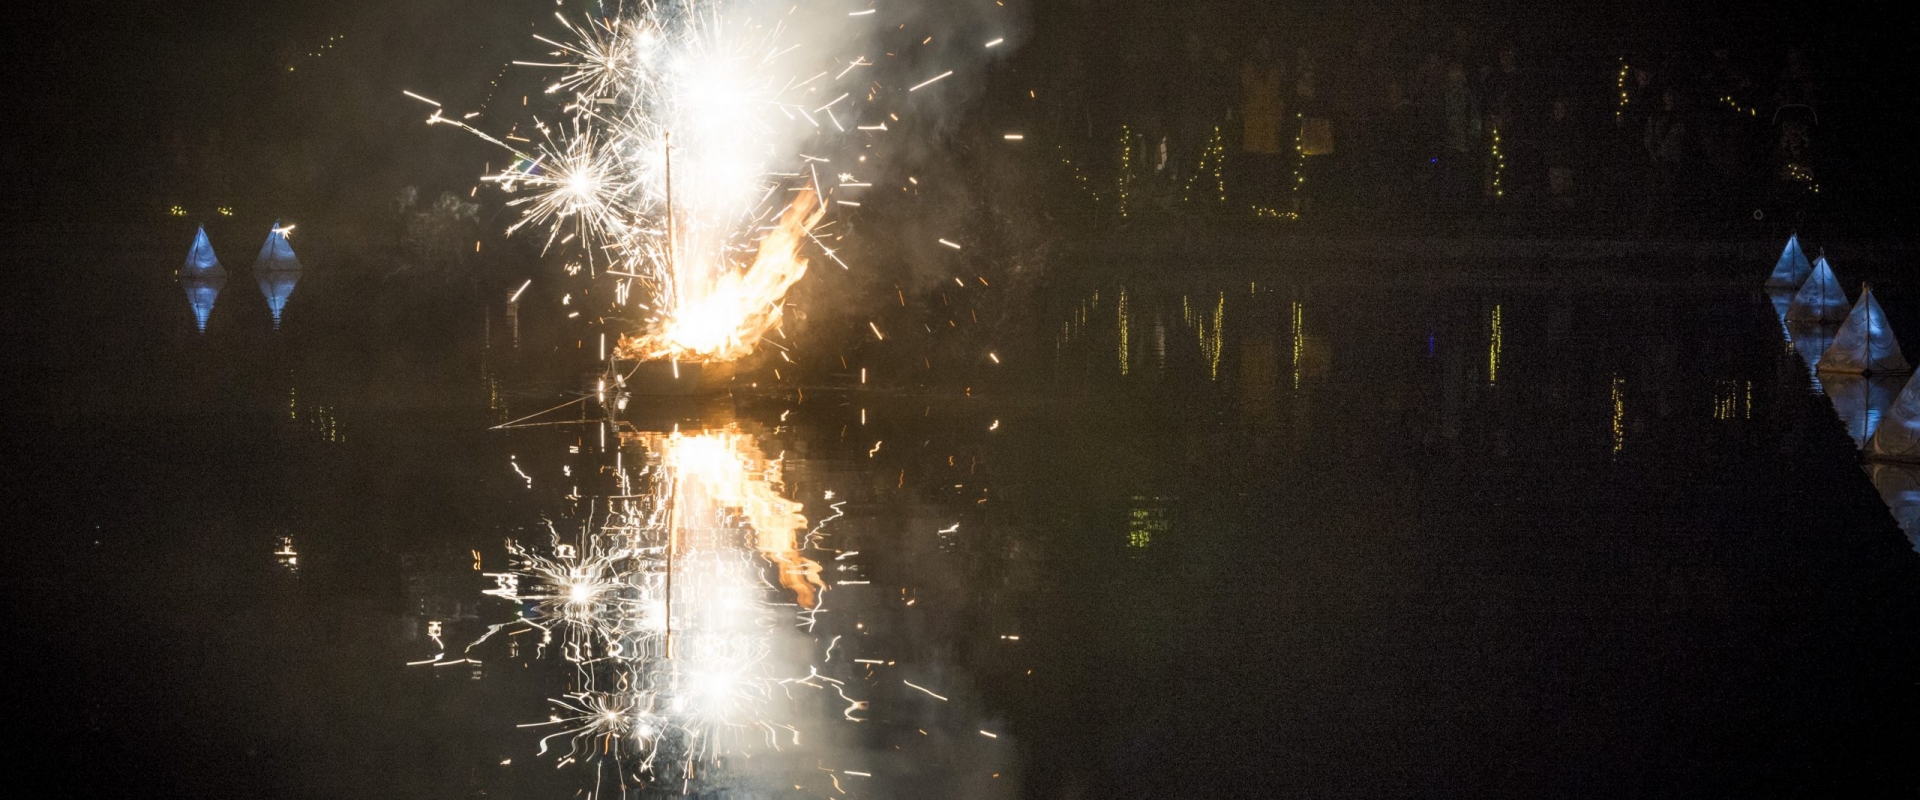 Fireworks spark from a small boat at night, reflected by the river beneath it.